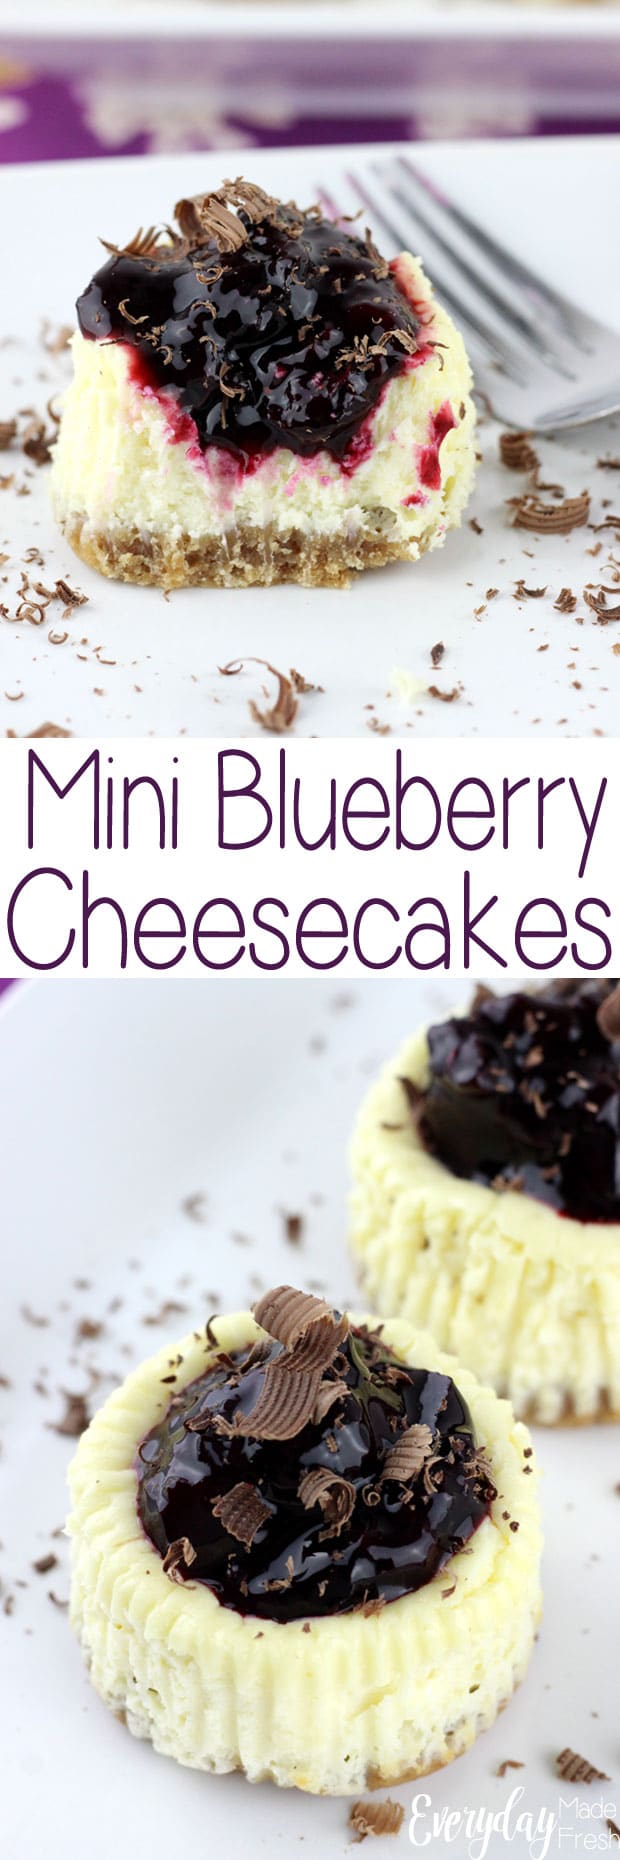 These Mini Blueberry Cheesecakes are made with Greek yogurt and low fat cream cheese, for a healthier choice. You won't even be able to taste the difference! | EverydayMadeFresh.com